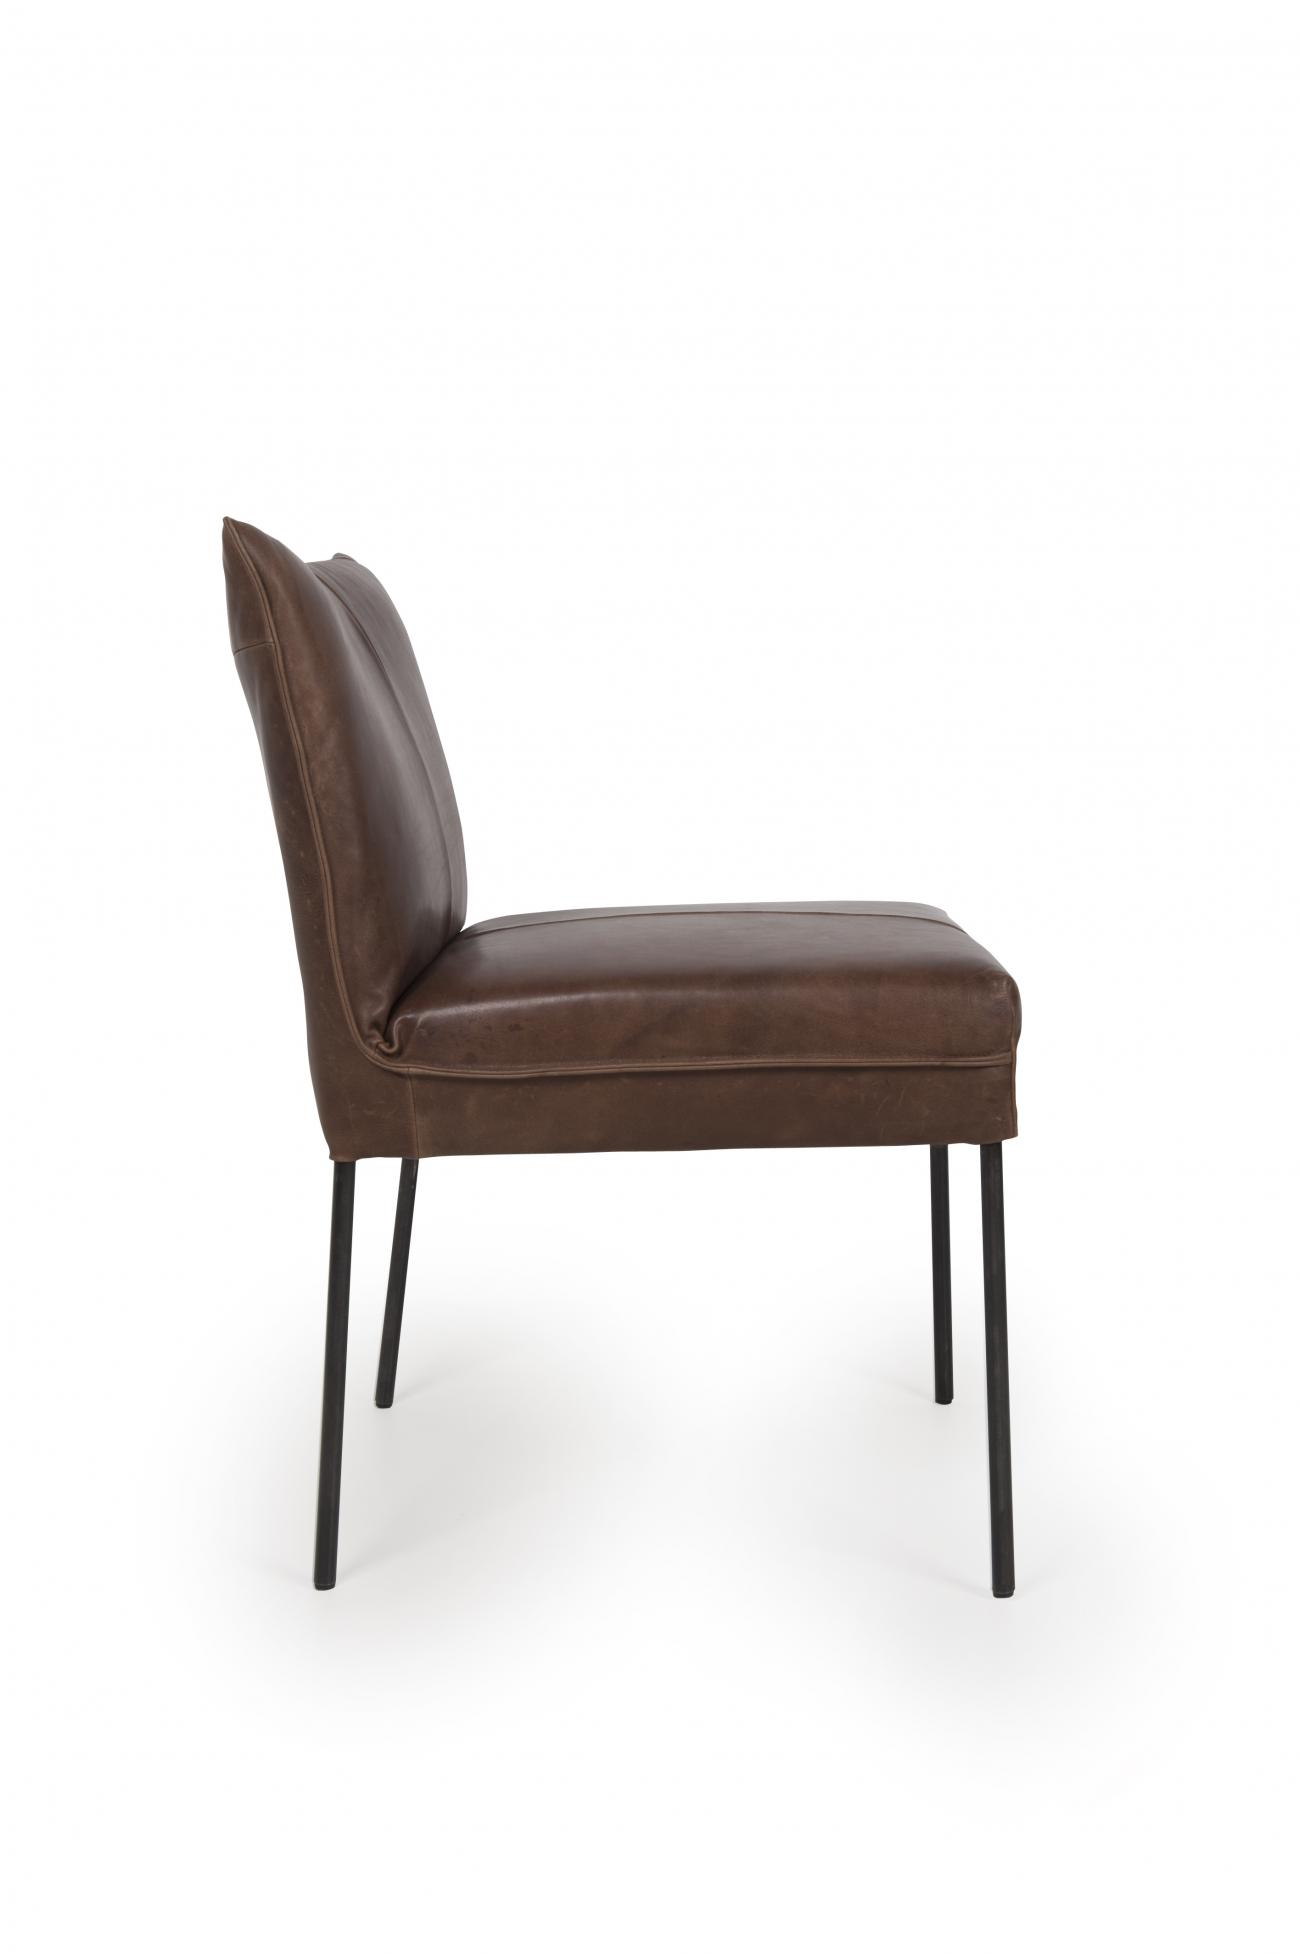 https://www.fundesign.nl/media/catalog/product/f/o/forward_diningchair_without_arm_luxor_fango_side.jpg